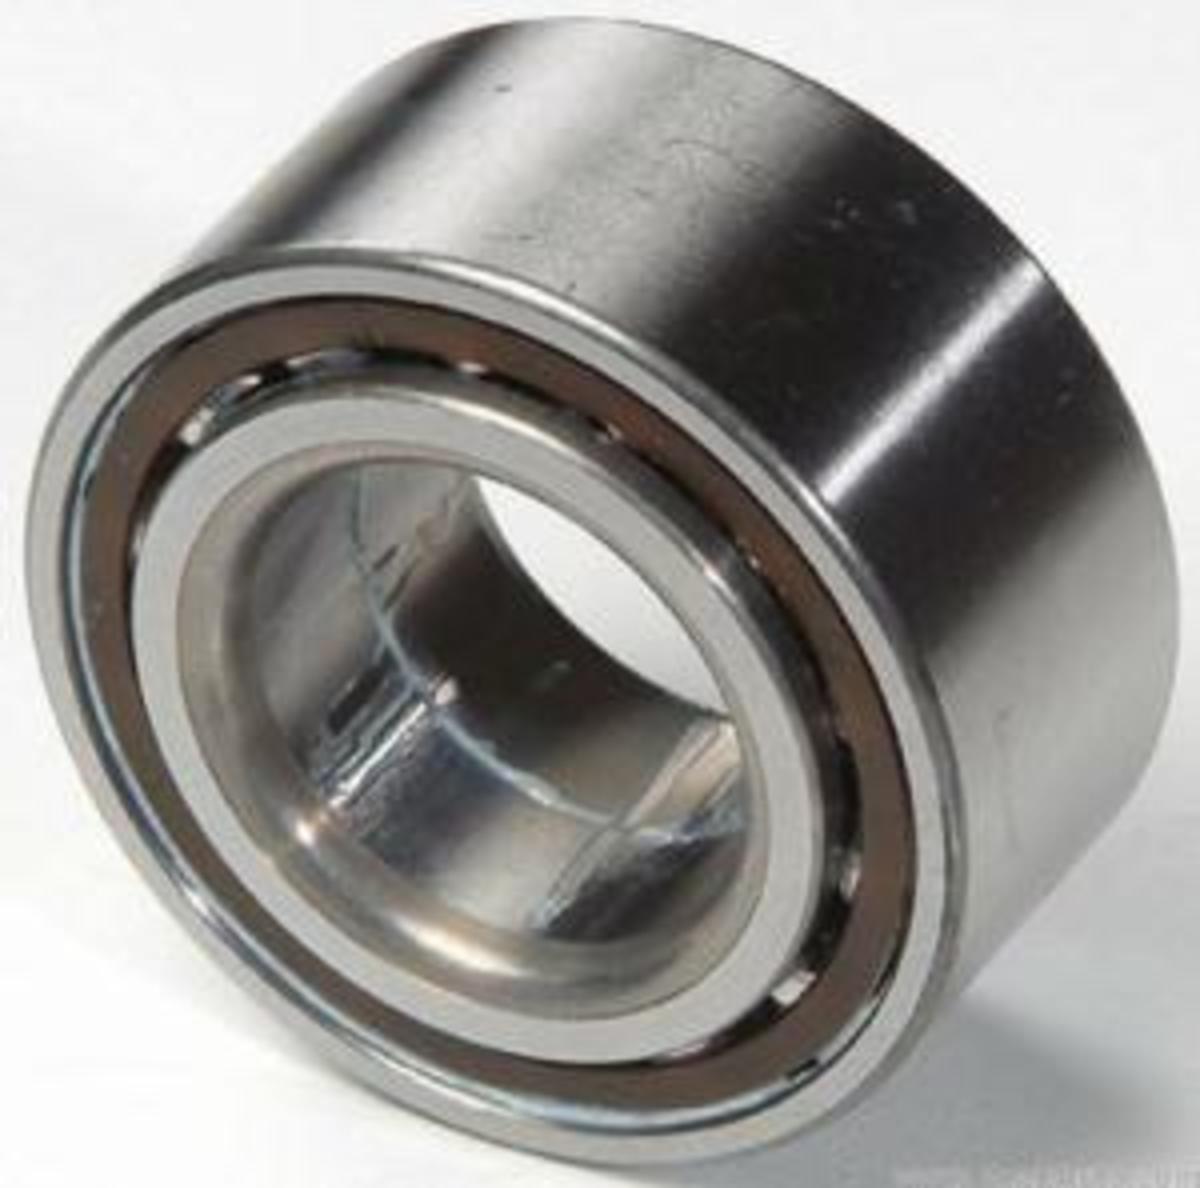 A front-wheel-drive wheel bearing.  Note the two-piece inner race.